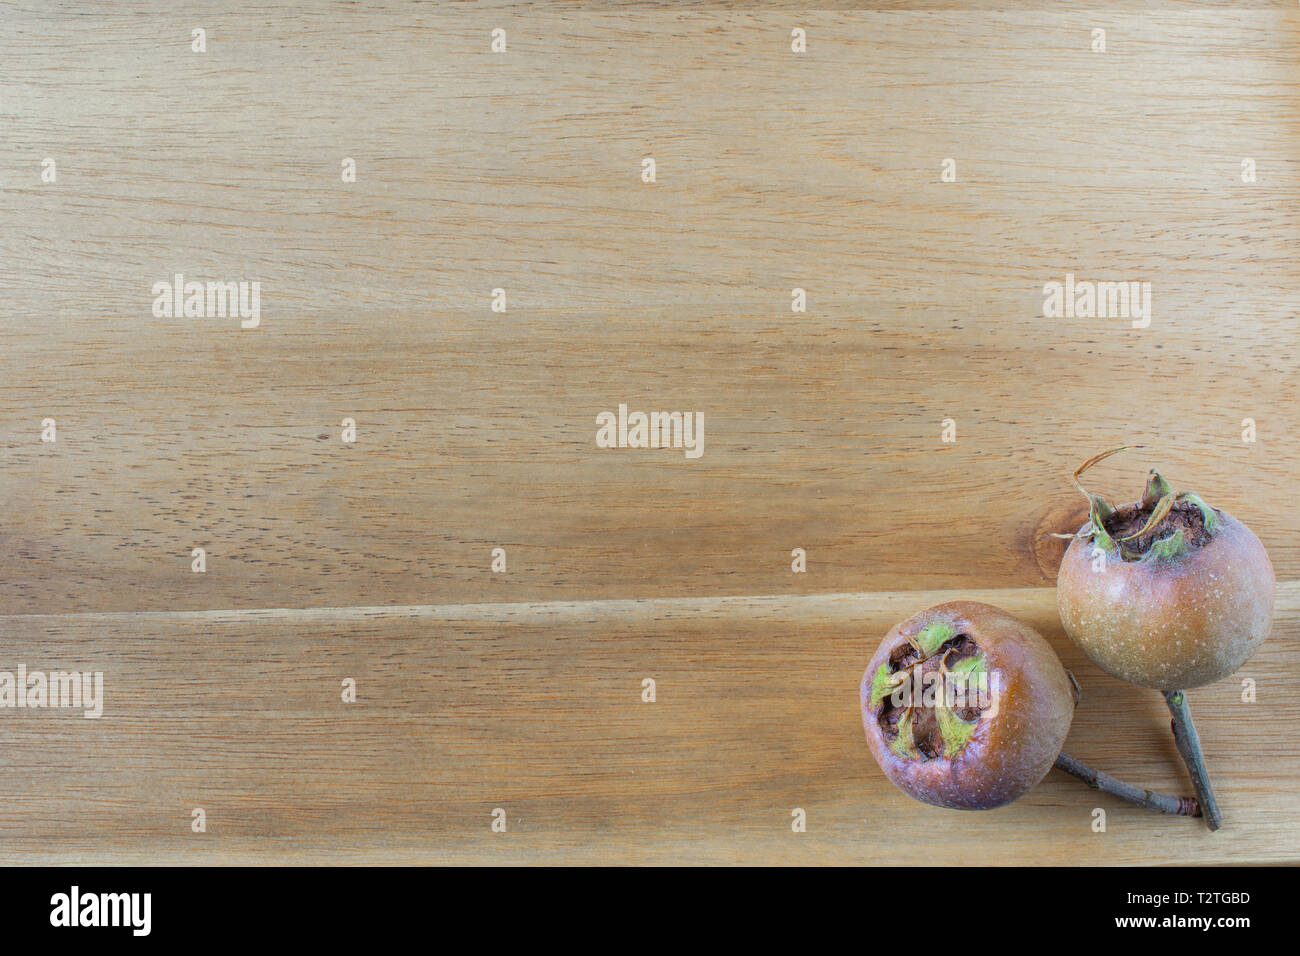 composition of fresh medlar fruits on a wooden board with copy space Stock Photo